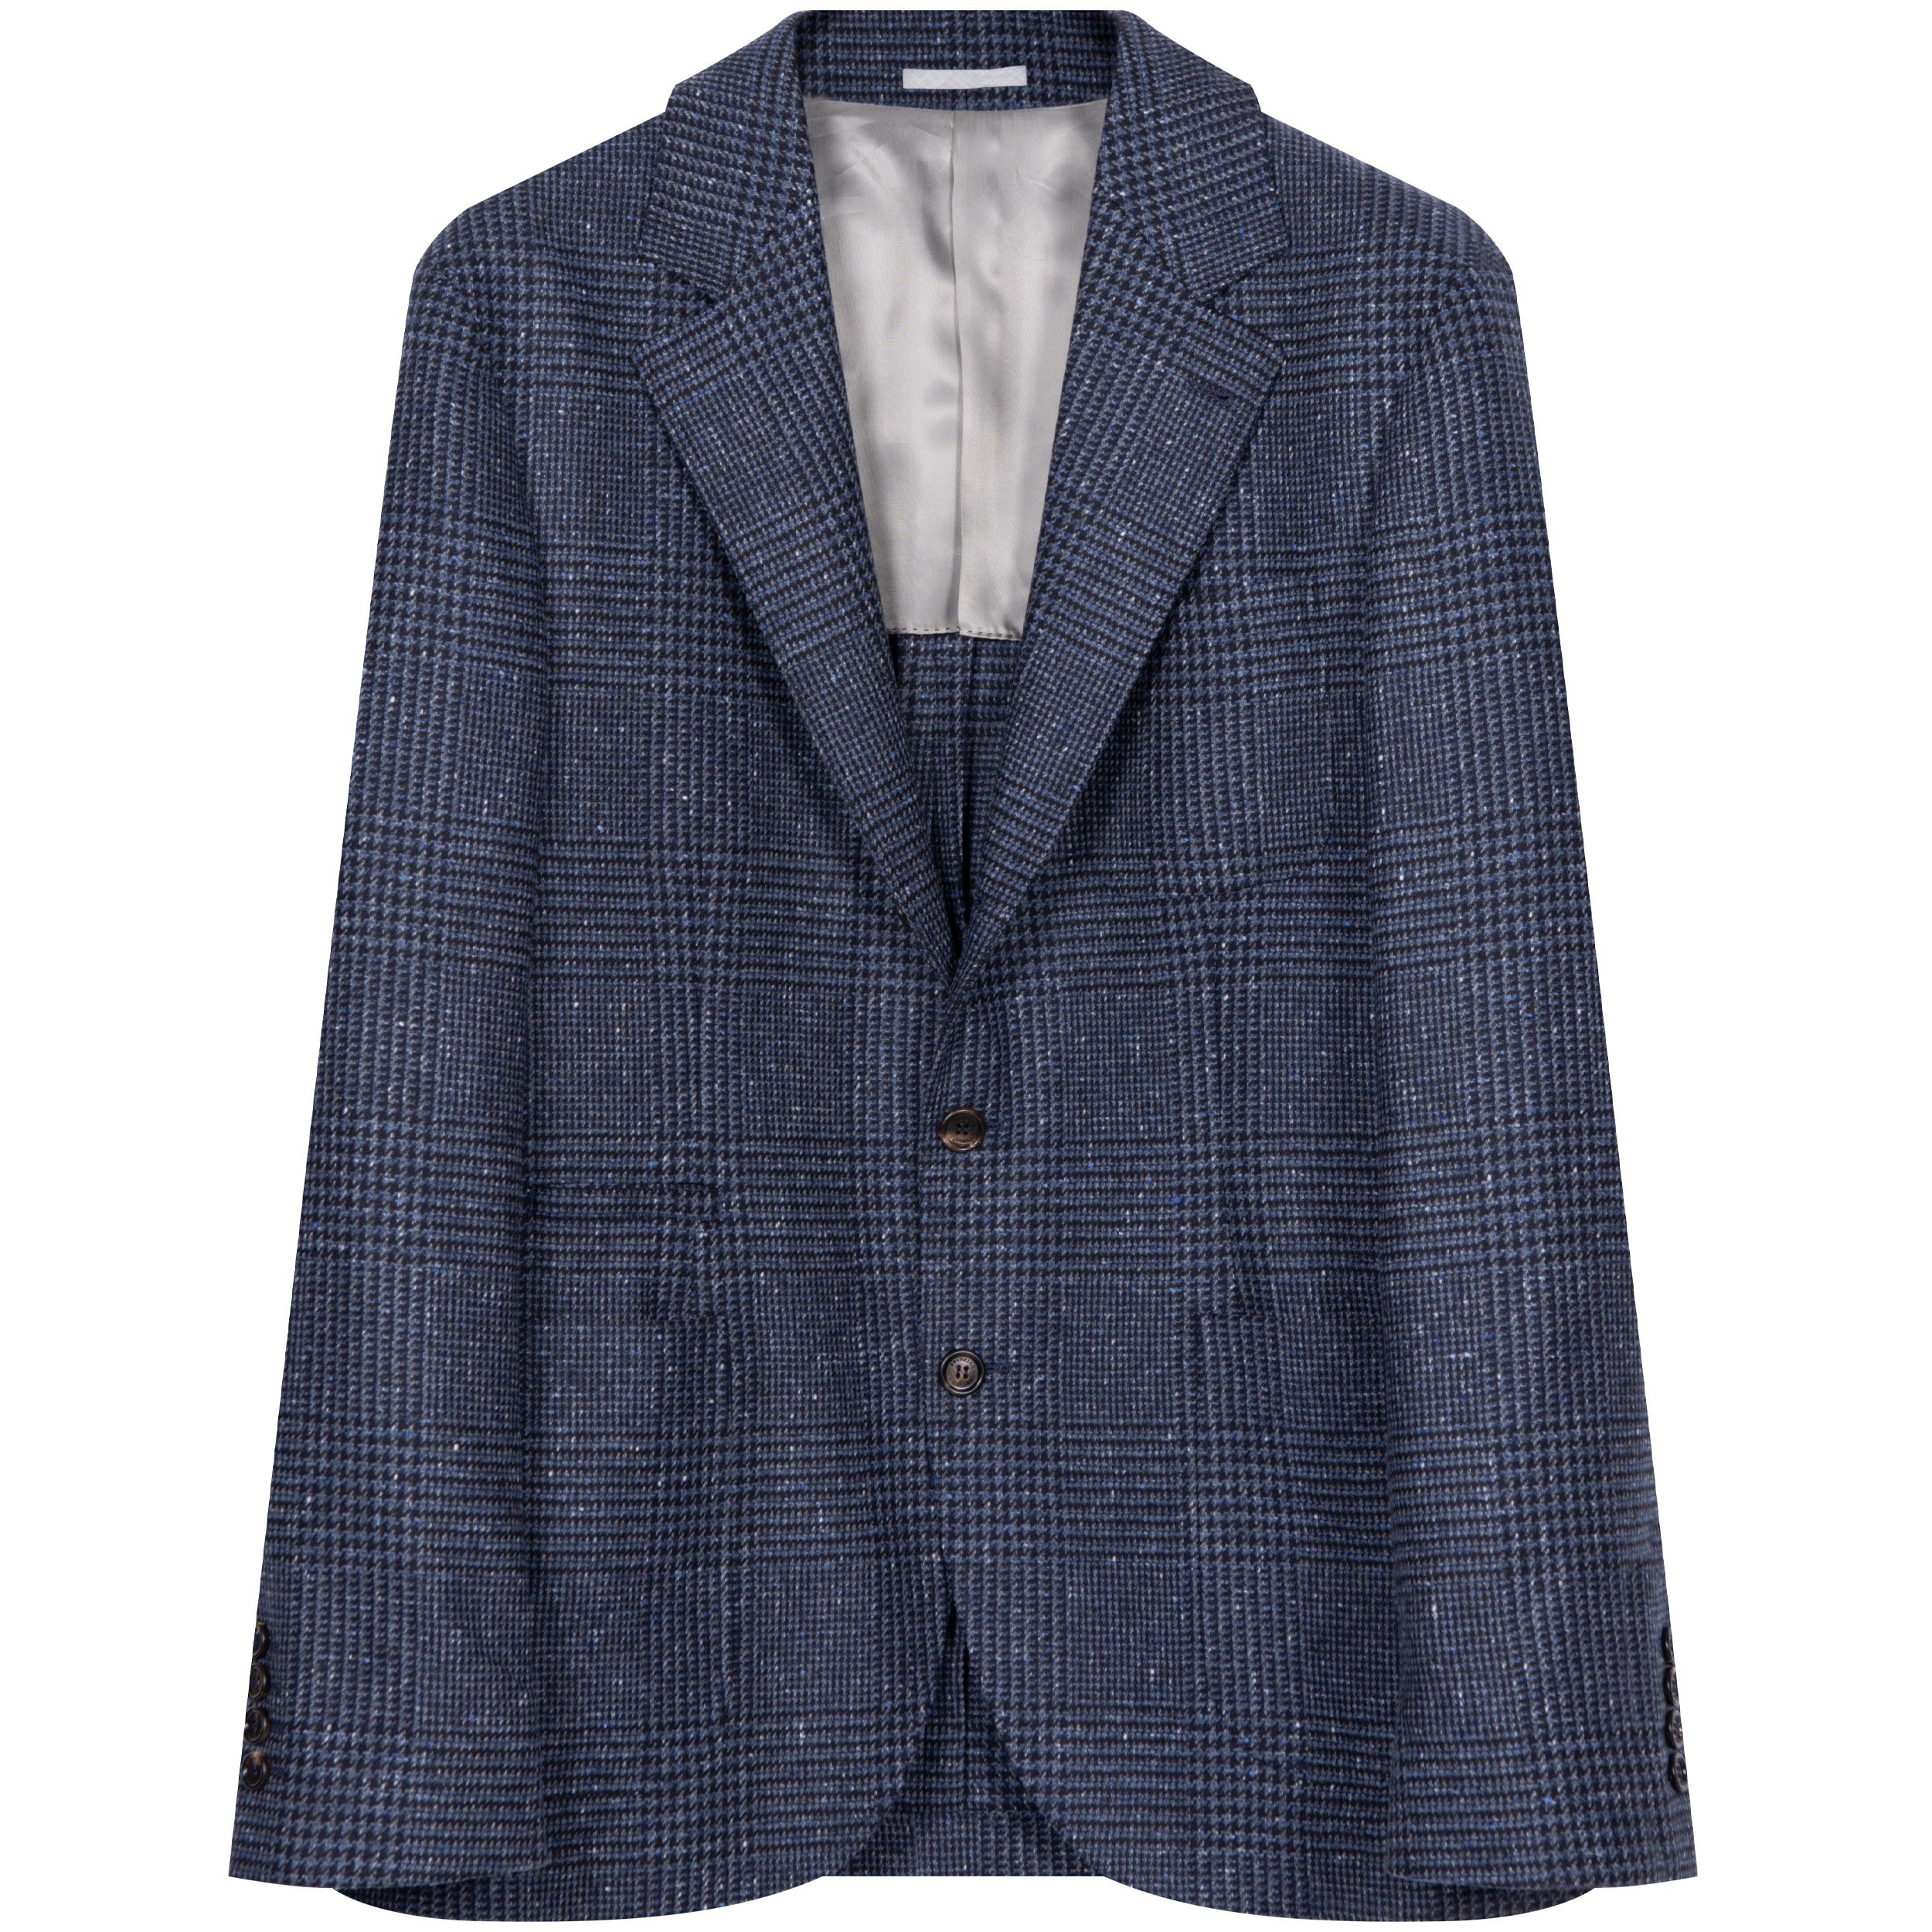 BRUNELLO CUCINELLI ’Prince Of Wales’ Check Unstructured Tailored Jacket Navy